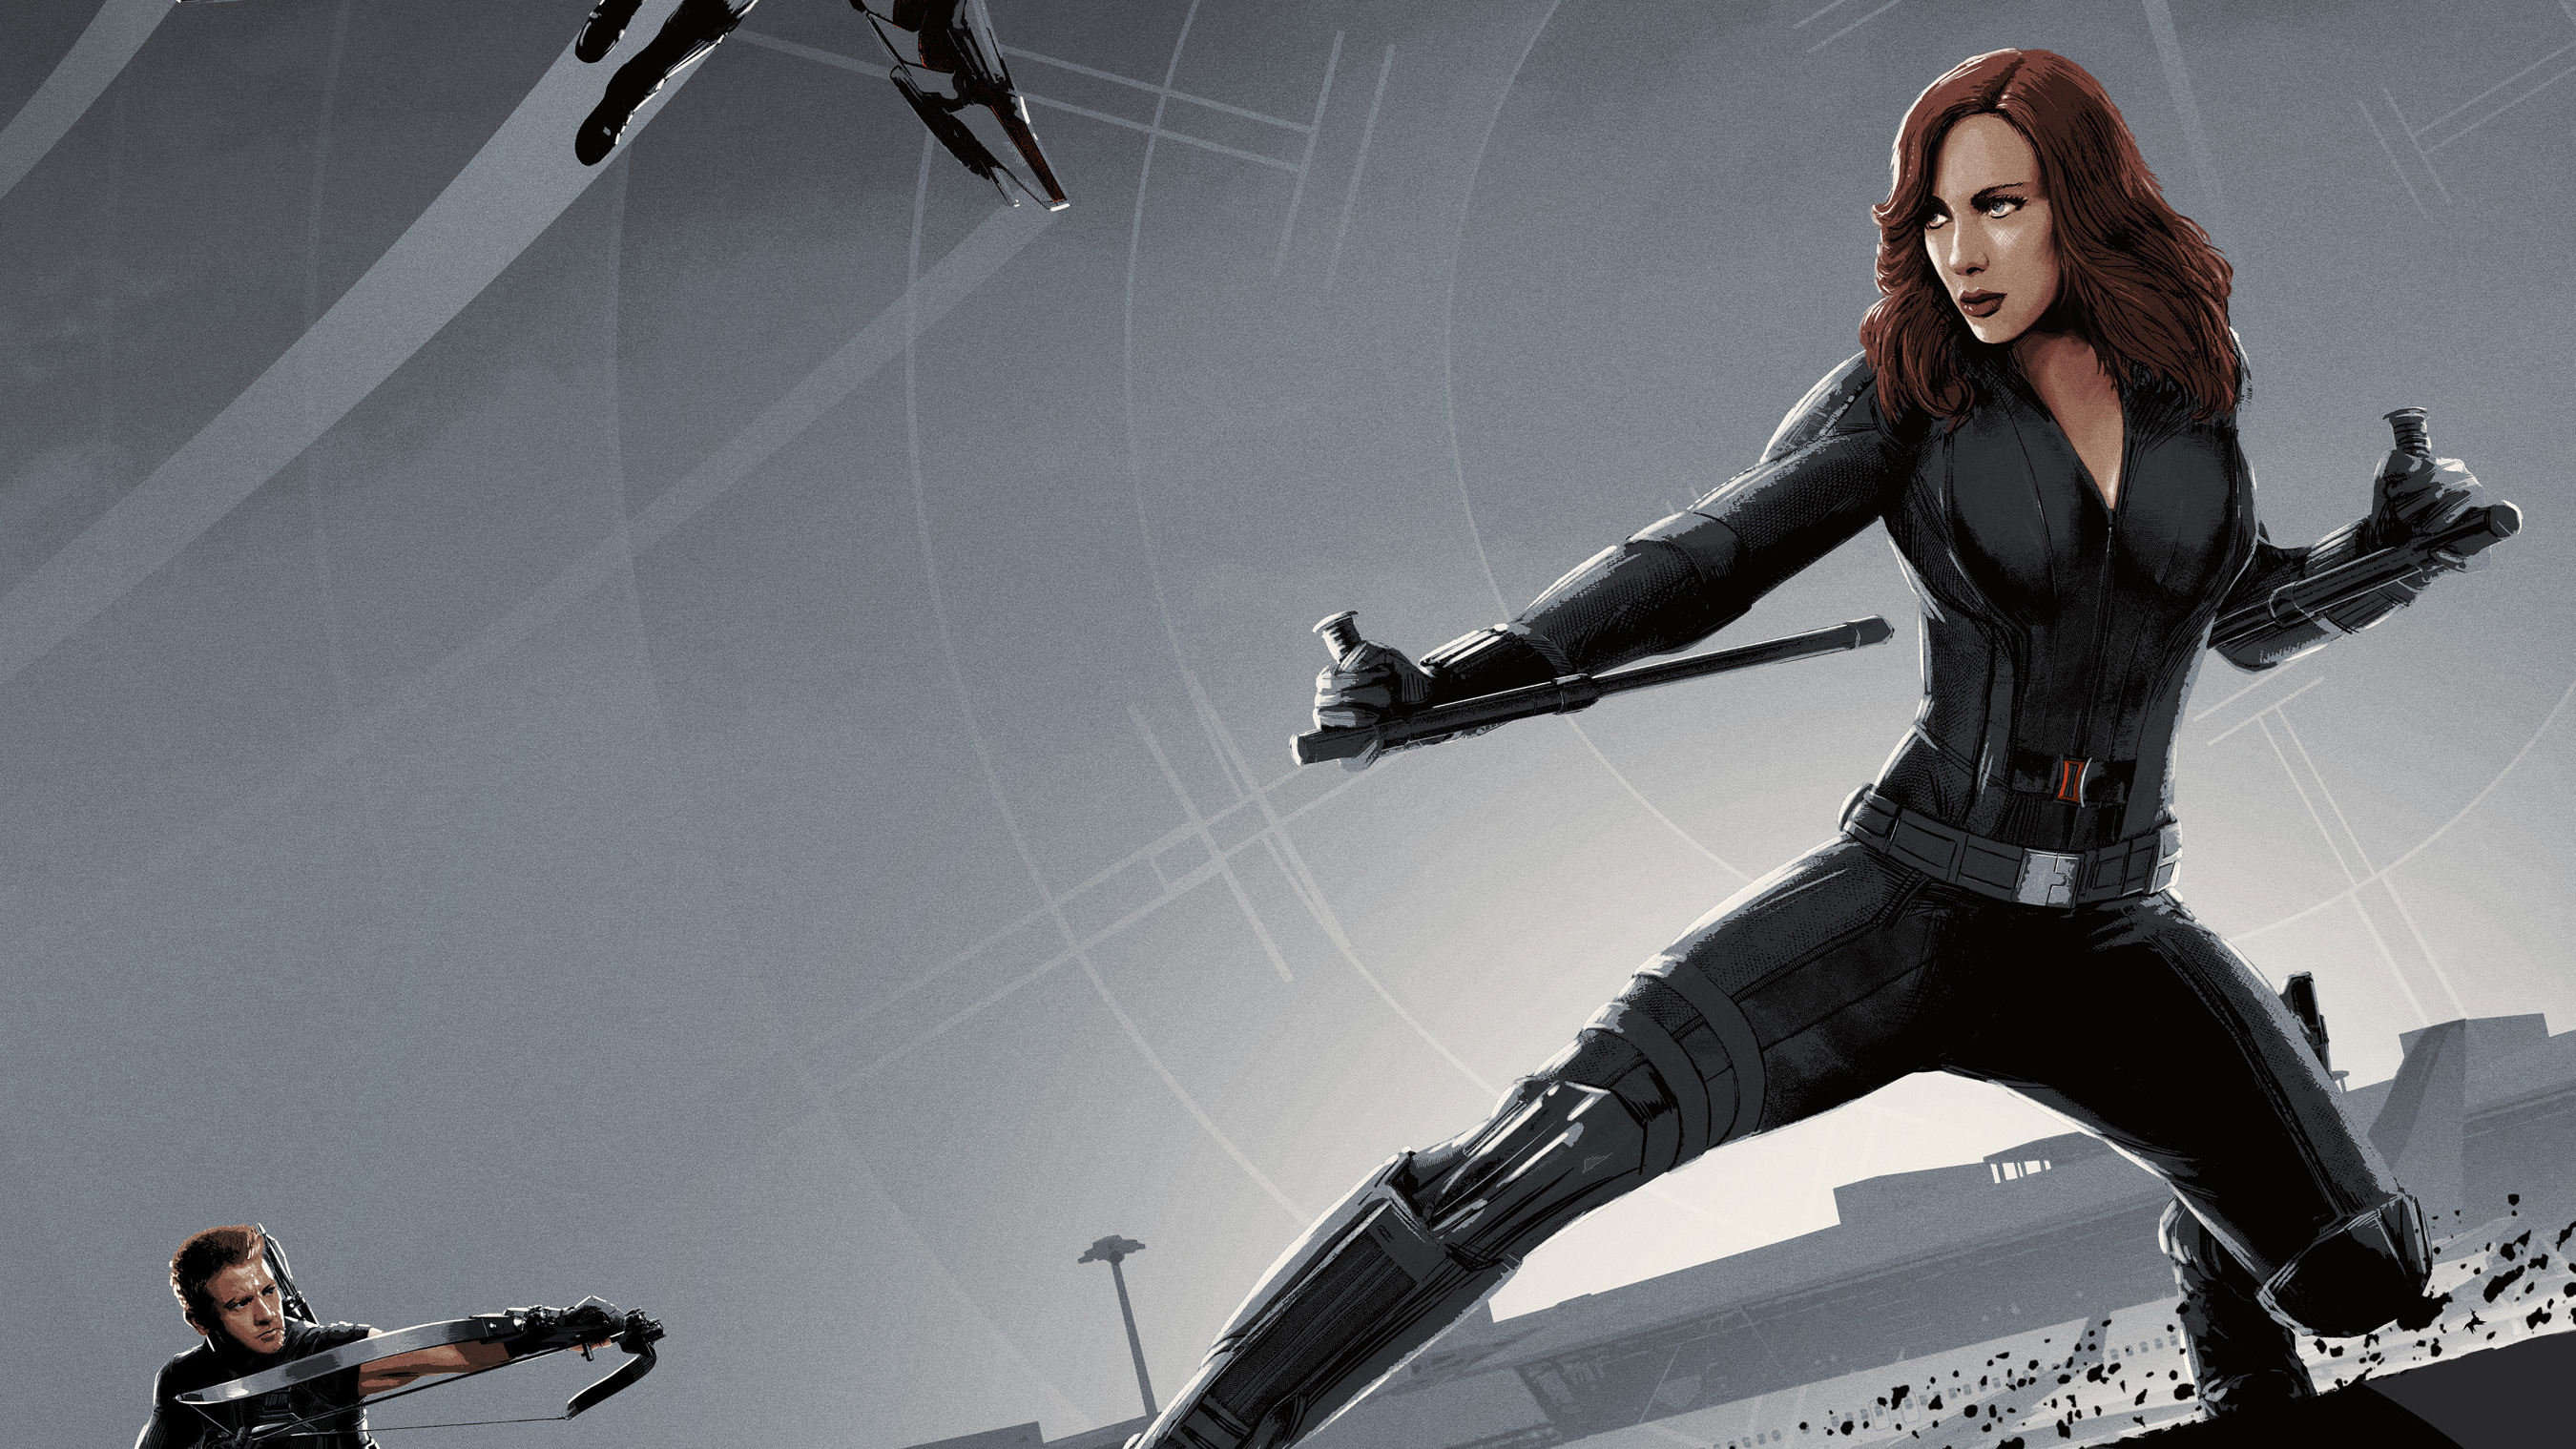 Black Widow Civil War Art Hd Superheroes 4k Wallpapers Images Backgrounds Photos And Pictures